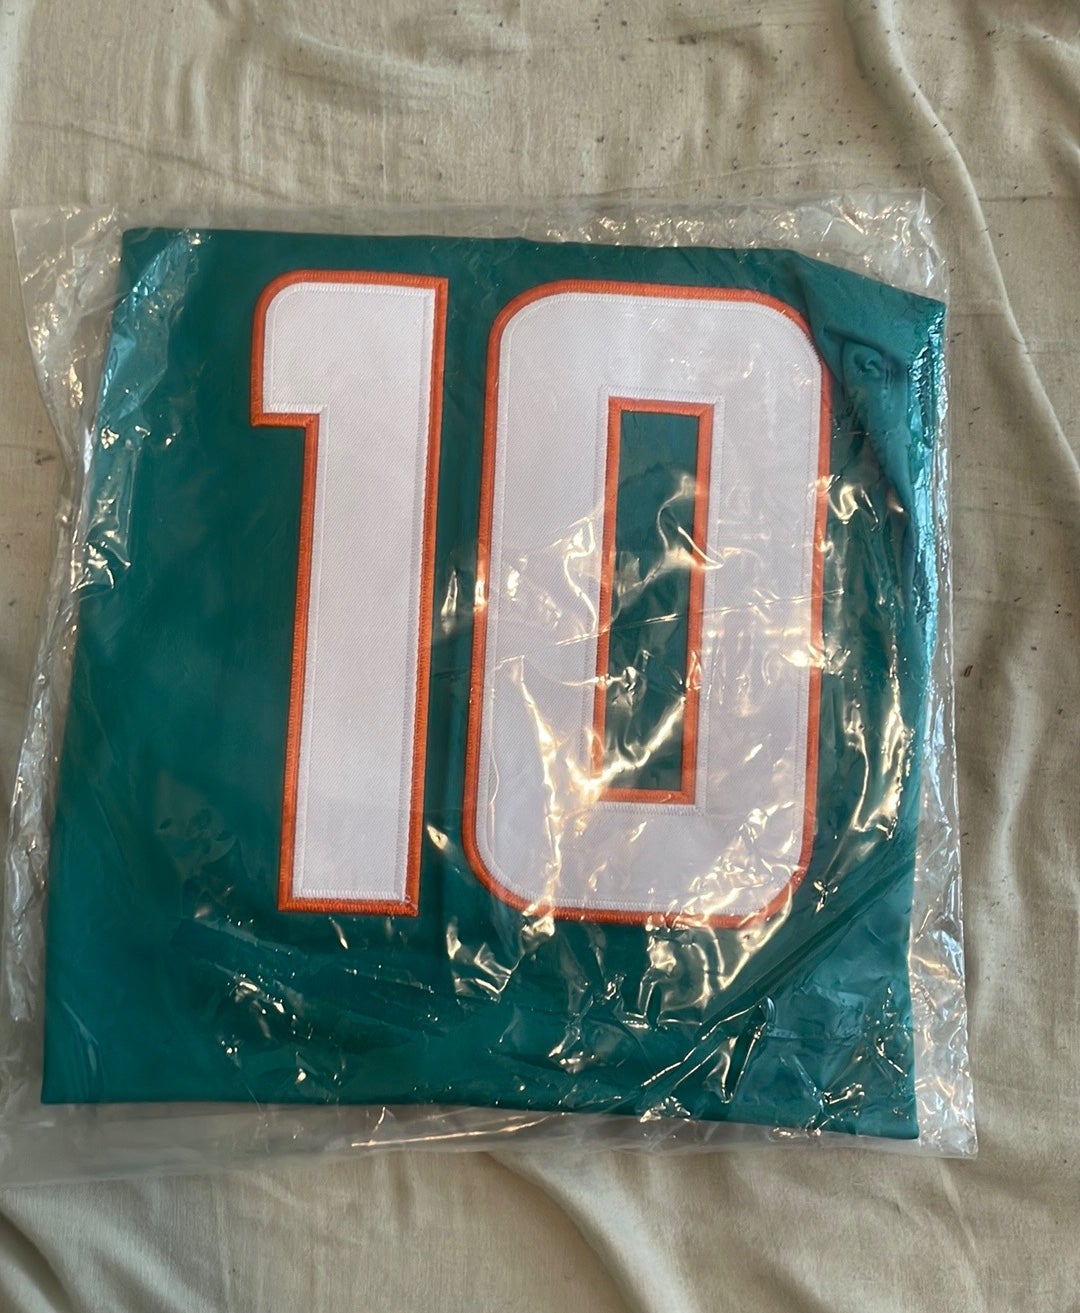 Brand New Miami Dolphins Tyreek Hill Jersey Size - Men's XL With Tags